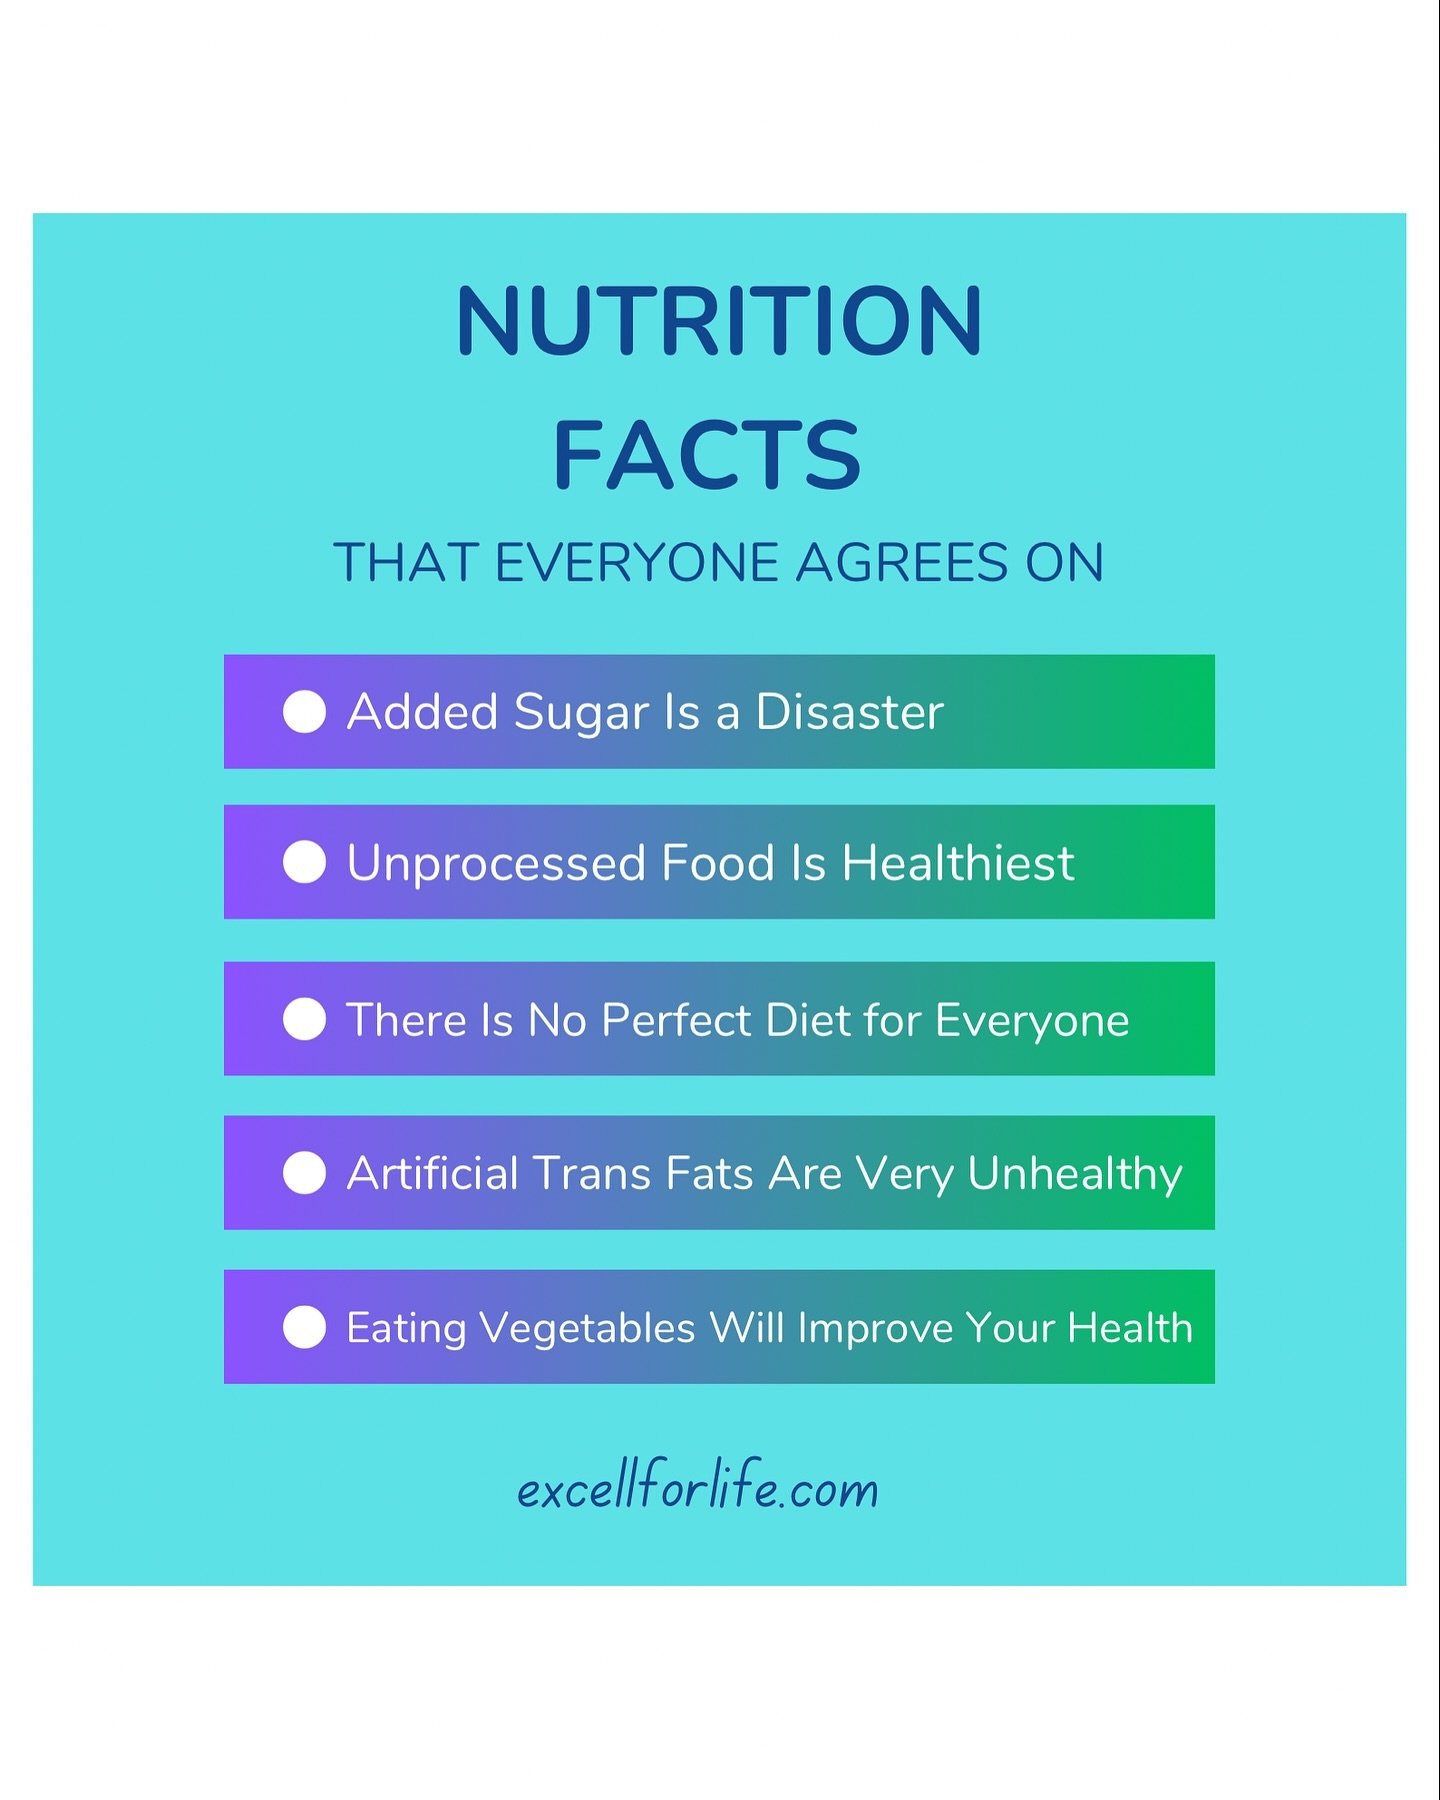 I think most everyone agrees that sugar and unprocessed foods are extremely unhealthy for our bodies!! We should all strive to eat whole foods, and a good mix of fruits and veggies.  These help our bodies fight off infections, reduce inflammation and